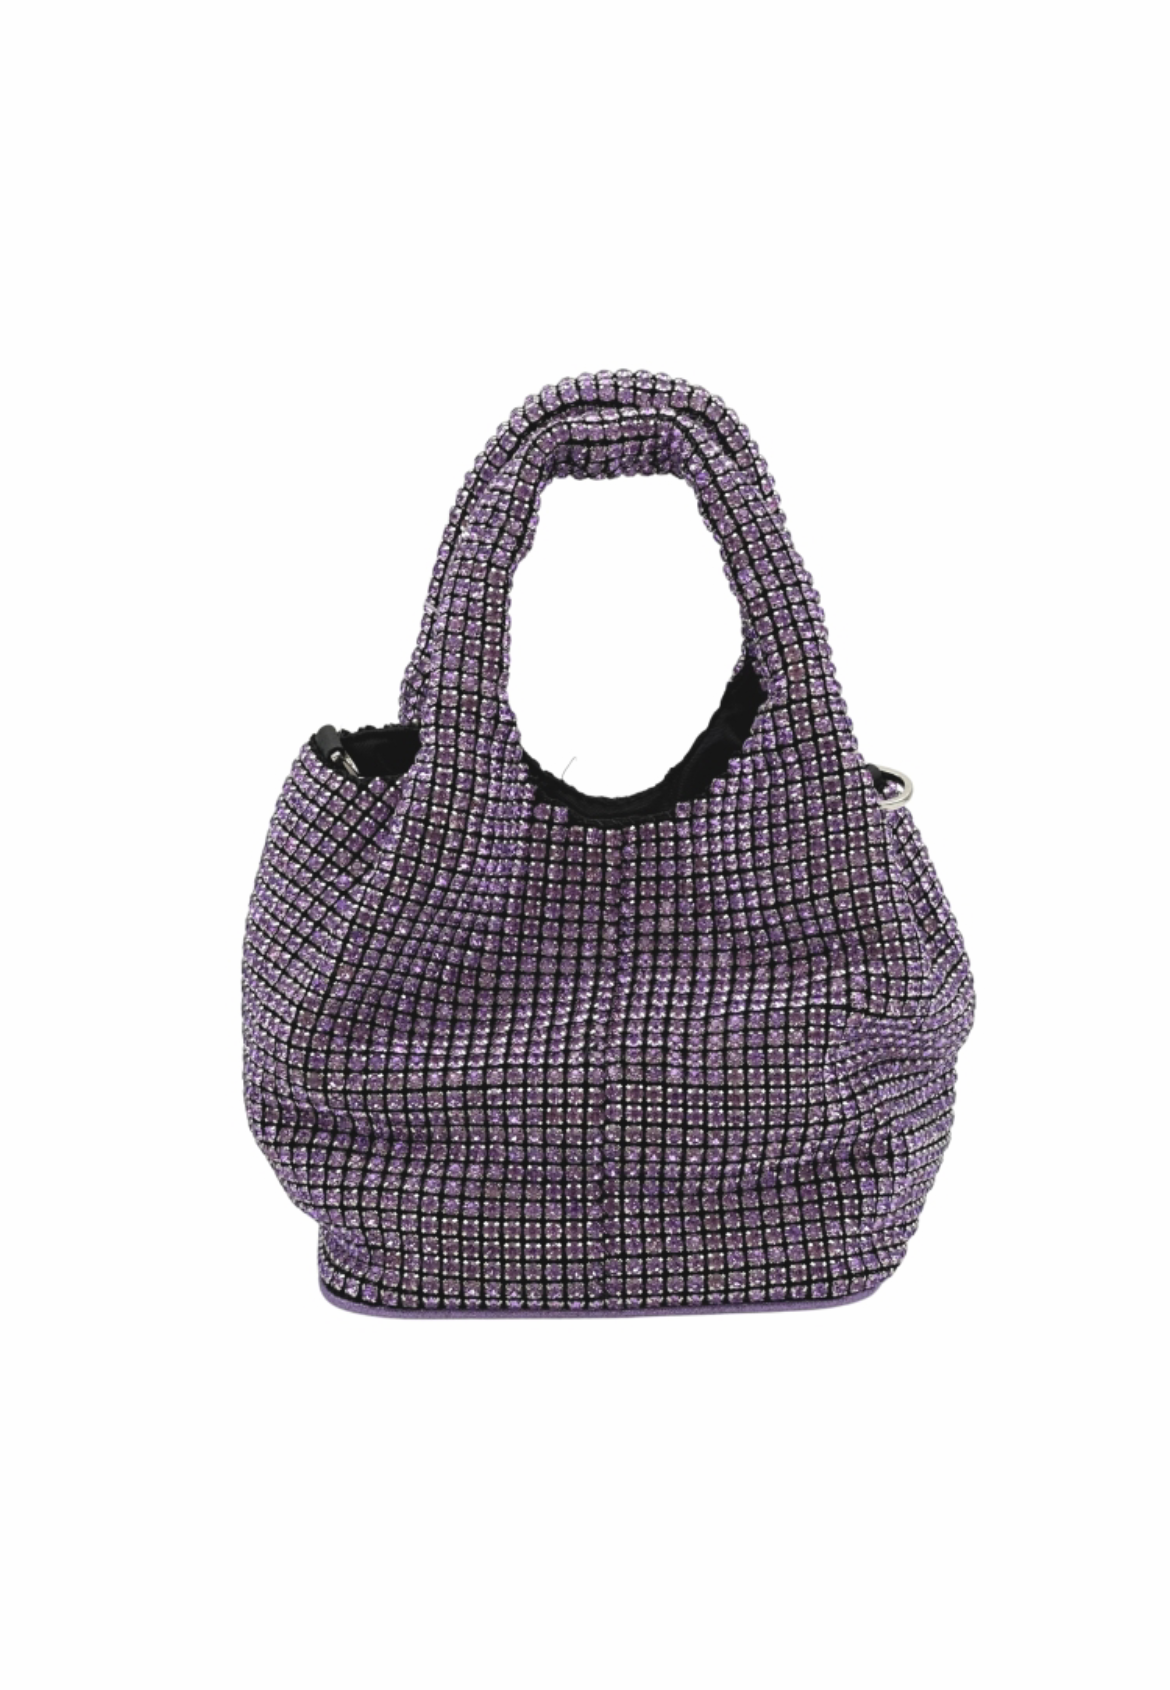 SALE - LILY Crystal Bag in Lila